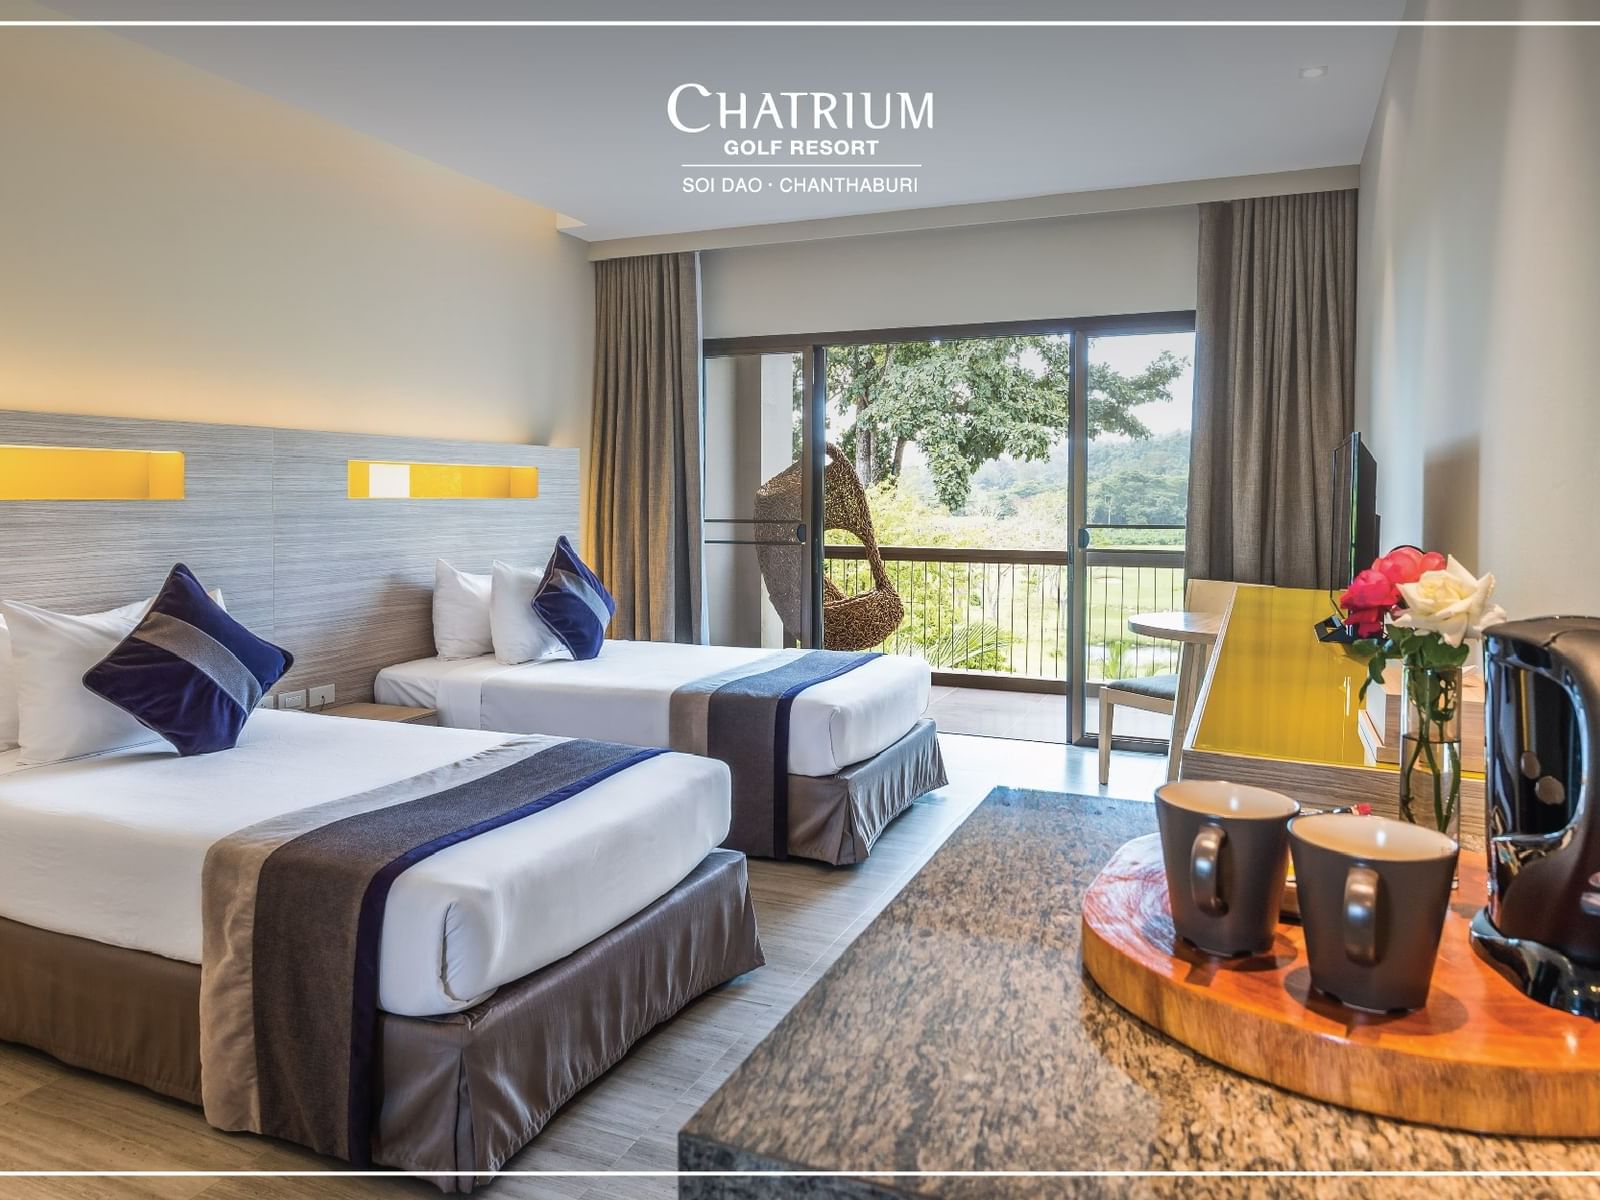 Banner of Chatrium Golf Resort with a room interior background